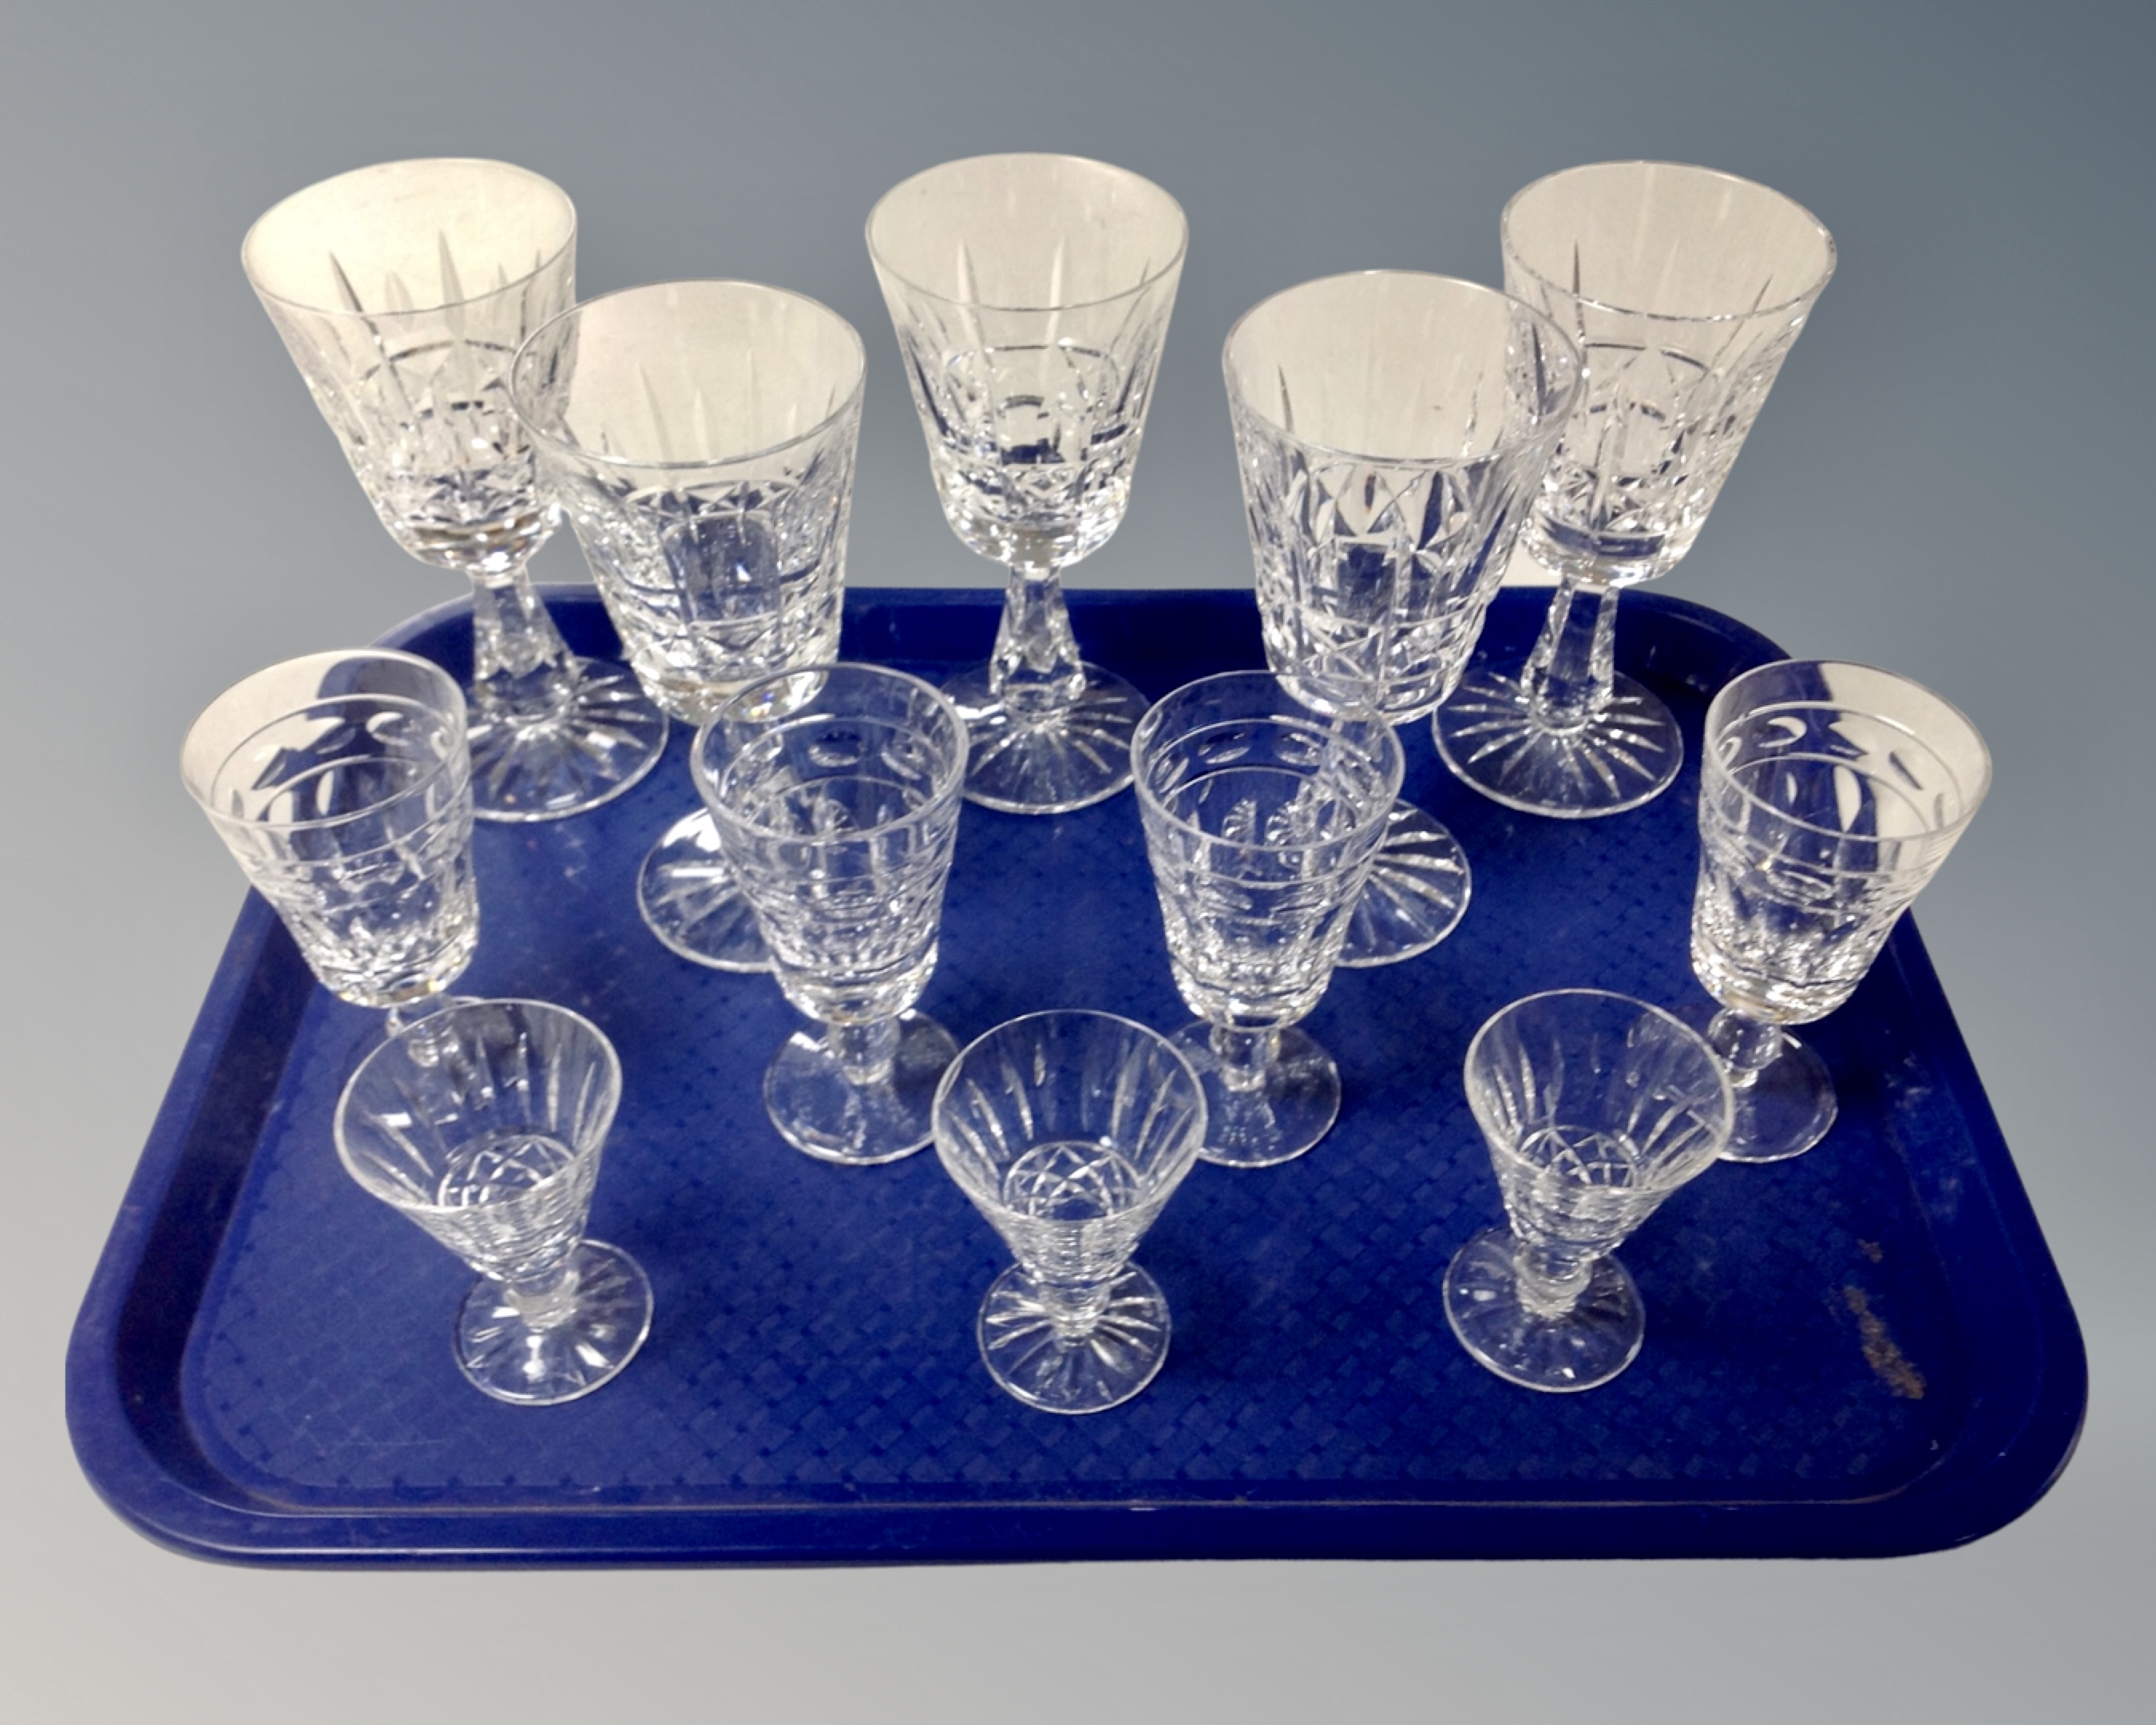 Three Waterford crystal sherry glasses, height 7.